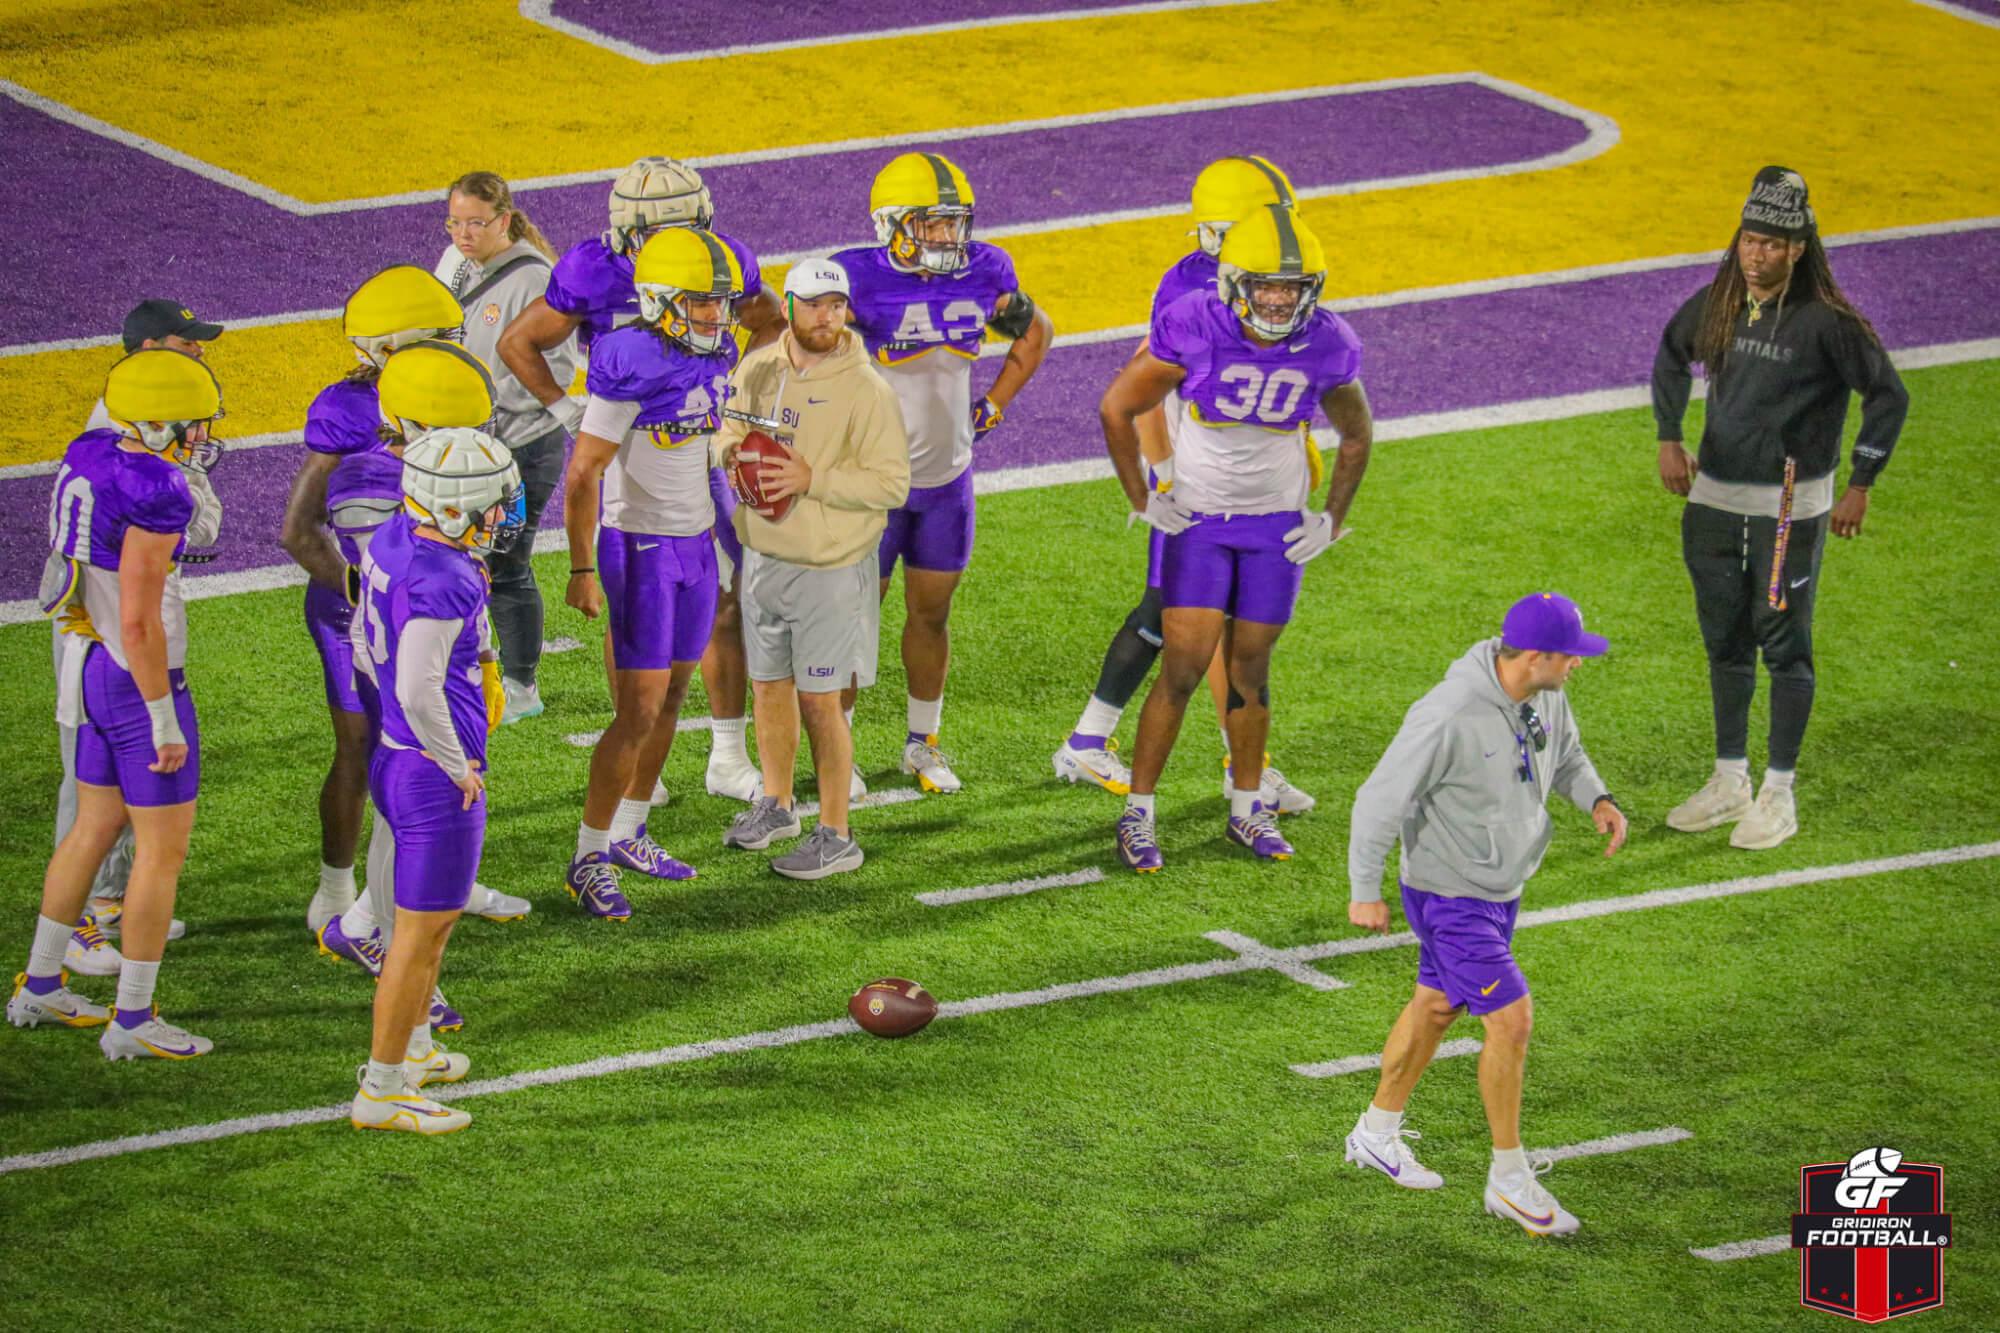 LSU Spring Practice Report #6: Blake Baker Breaks Down the Tigers Defense With Veteran & Young Players Emerging